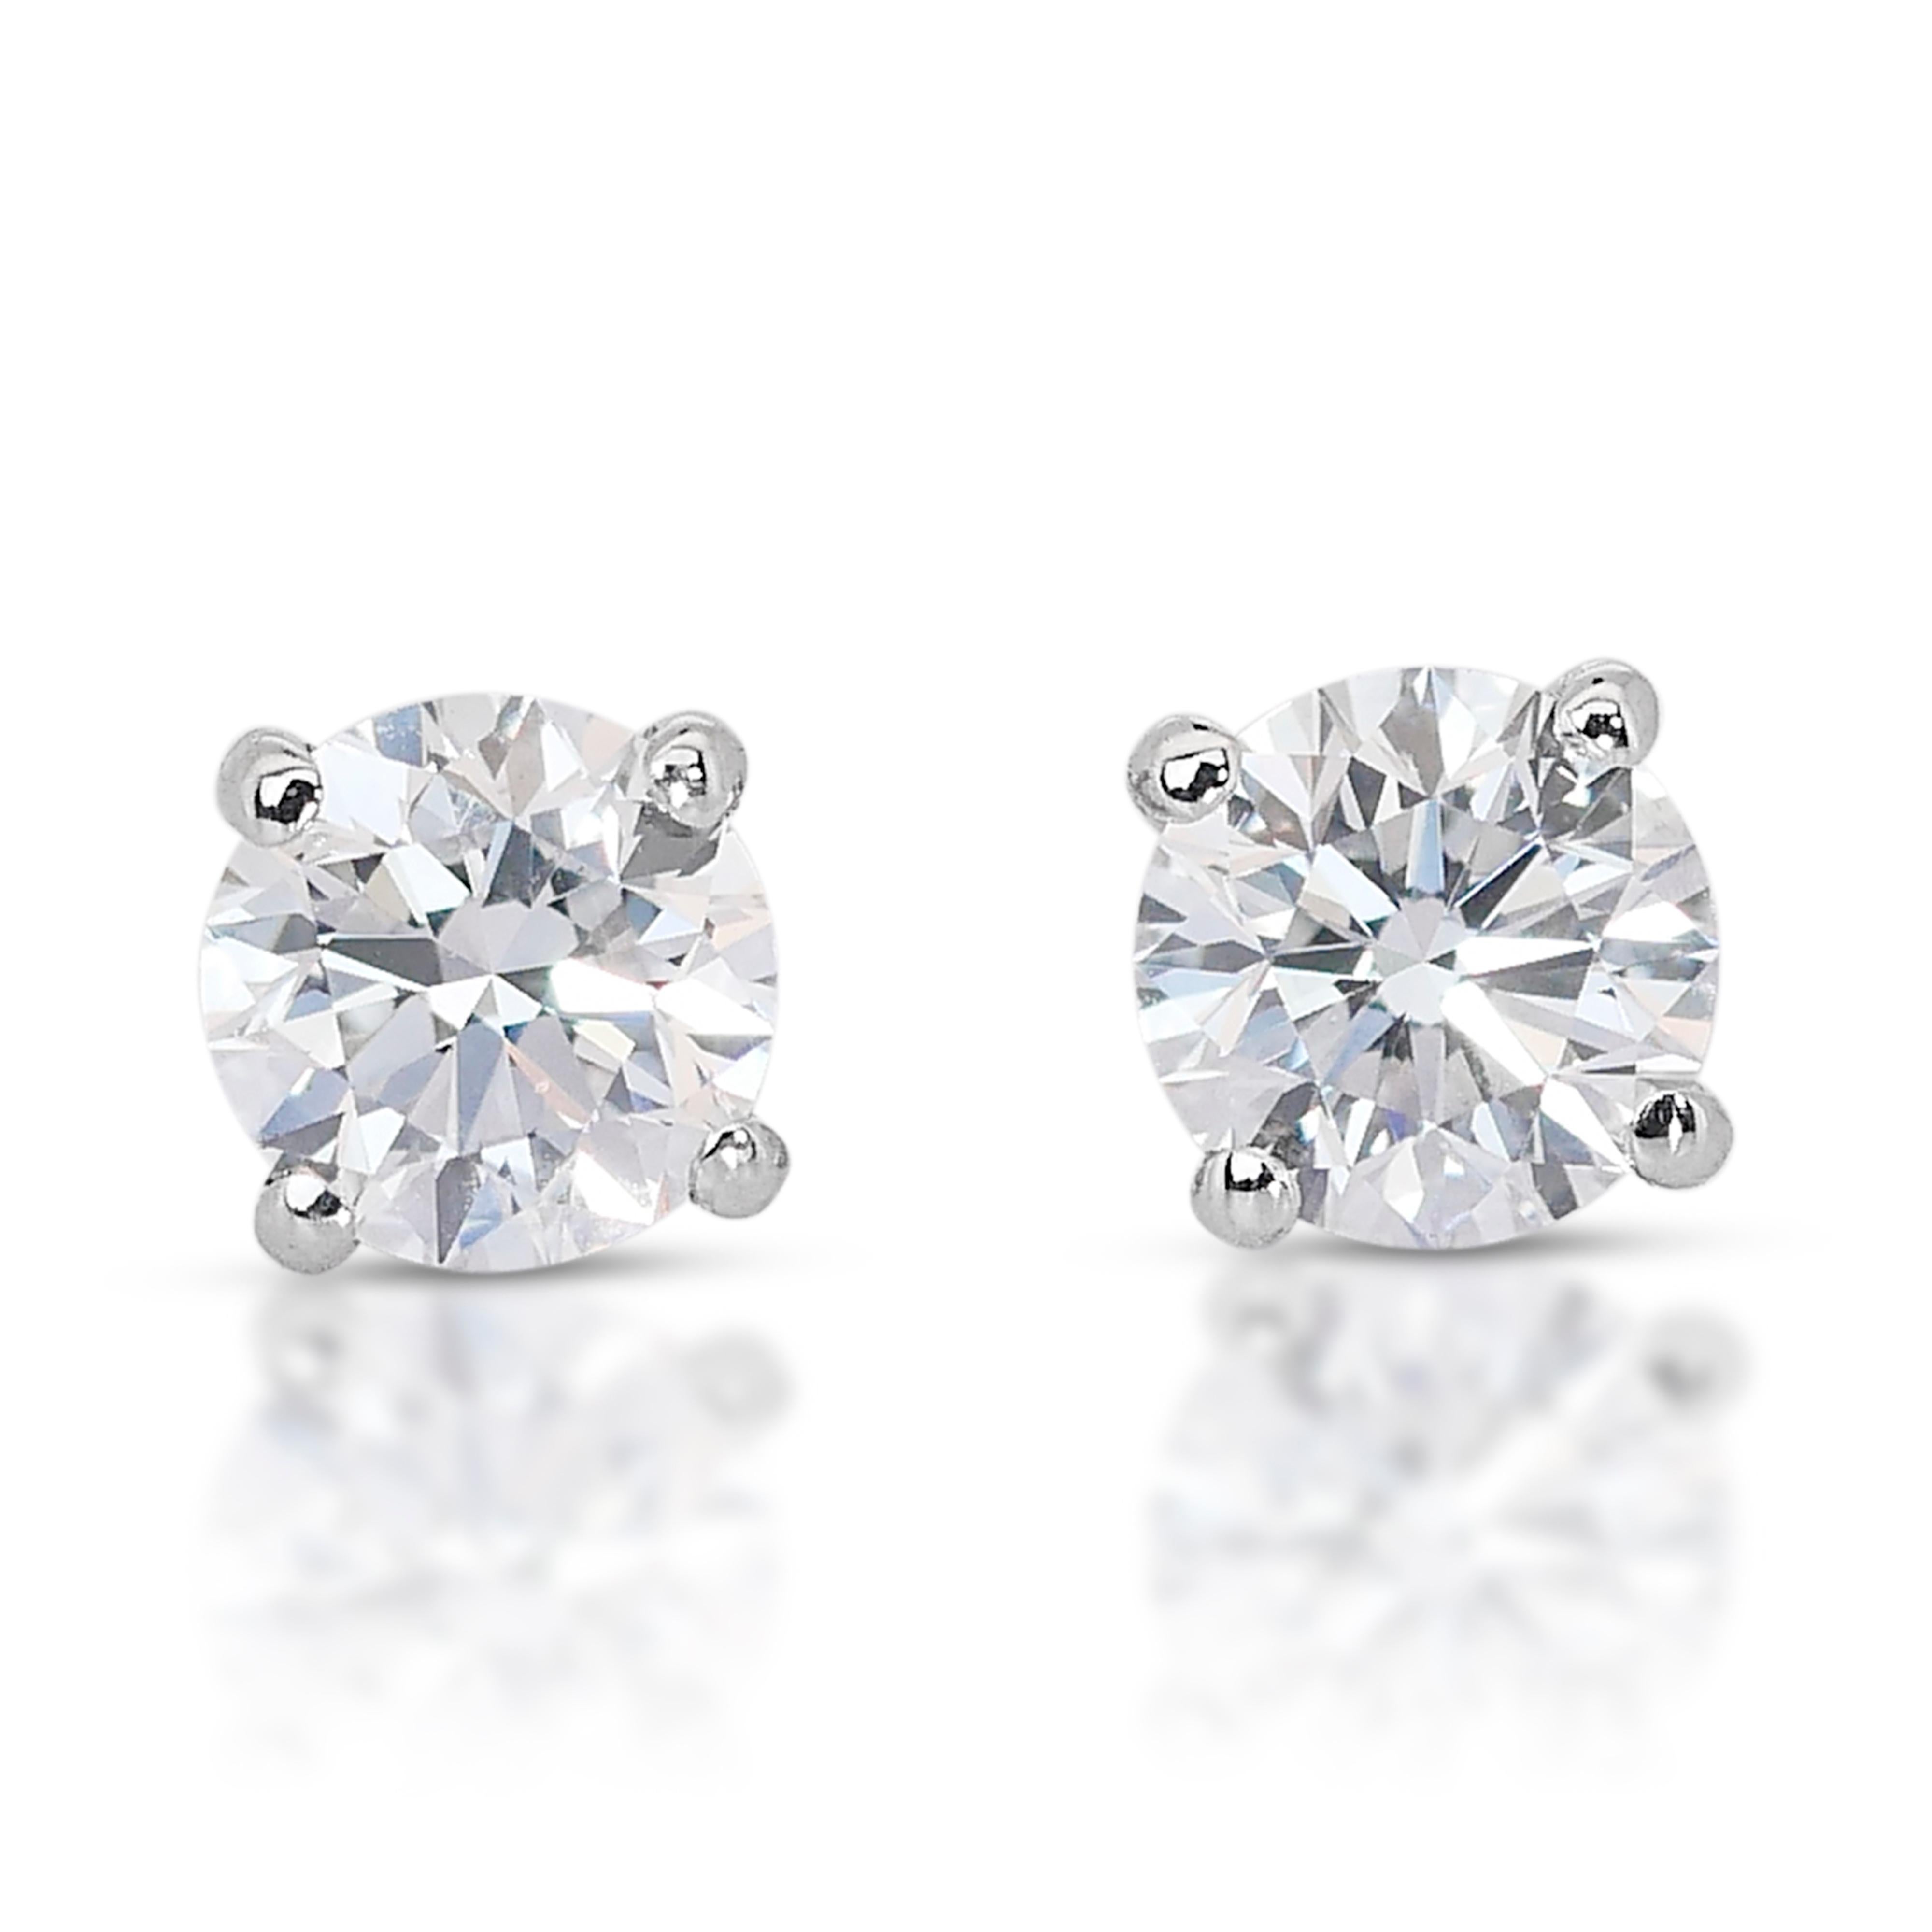 Round Cut Gleaming 18K White Gold Diamond Stud Earrings with 1.8ct- GIA Certified For Sale